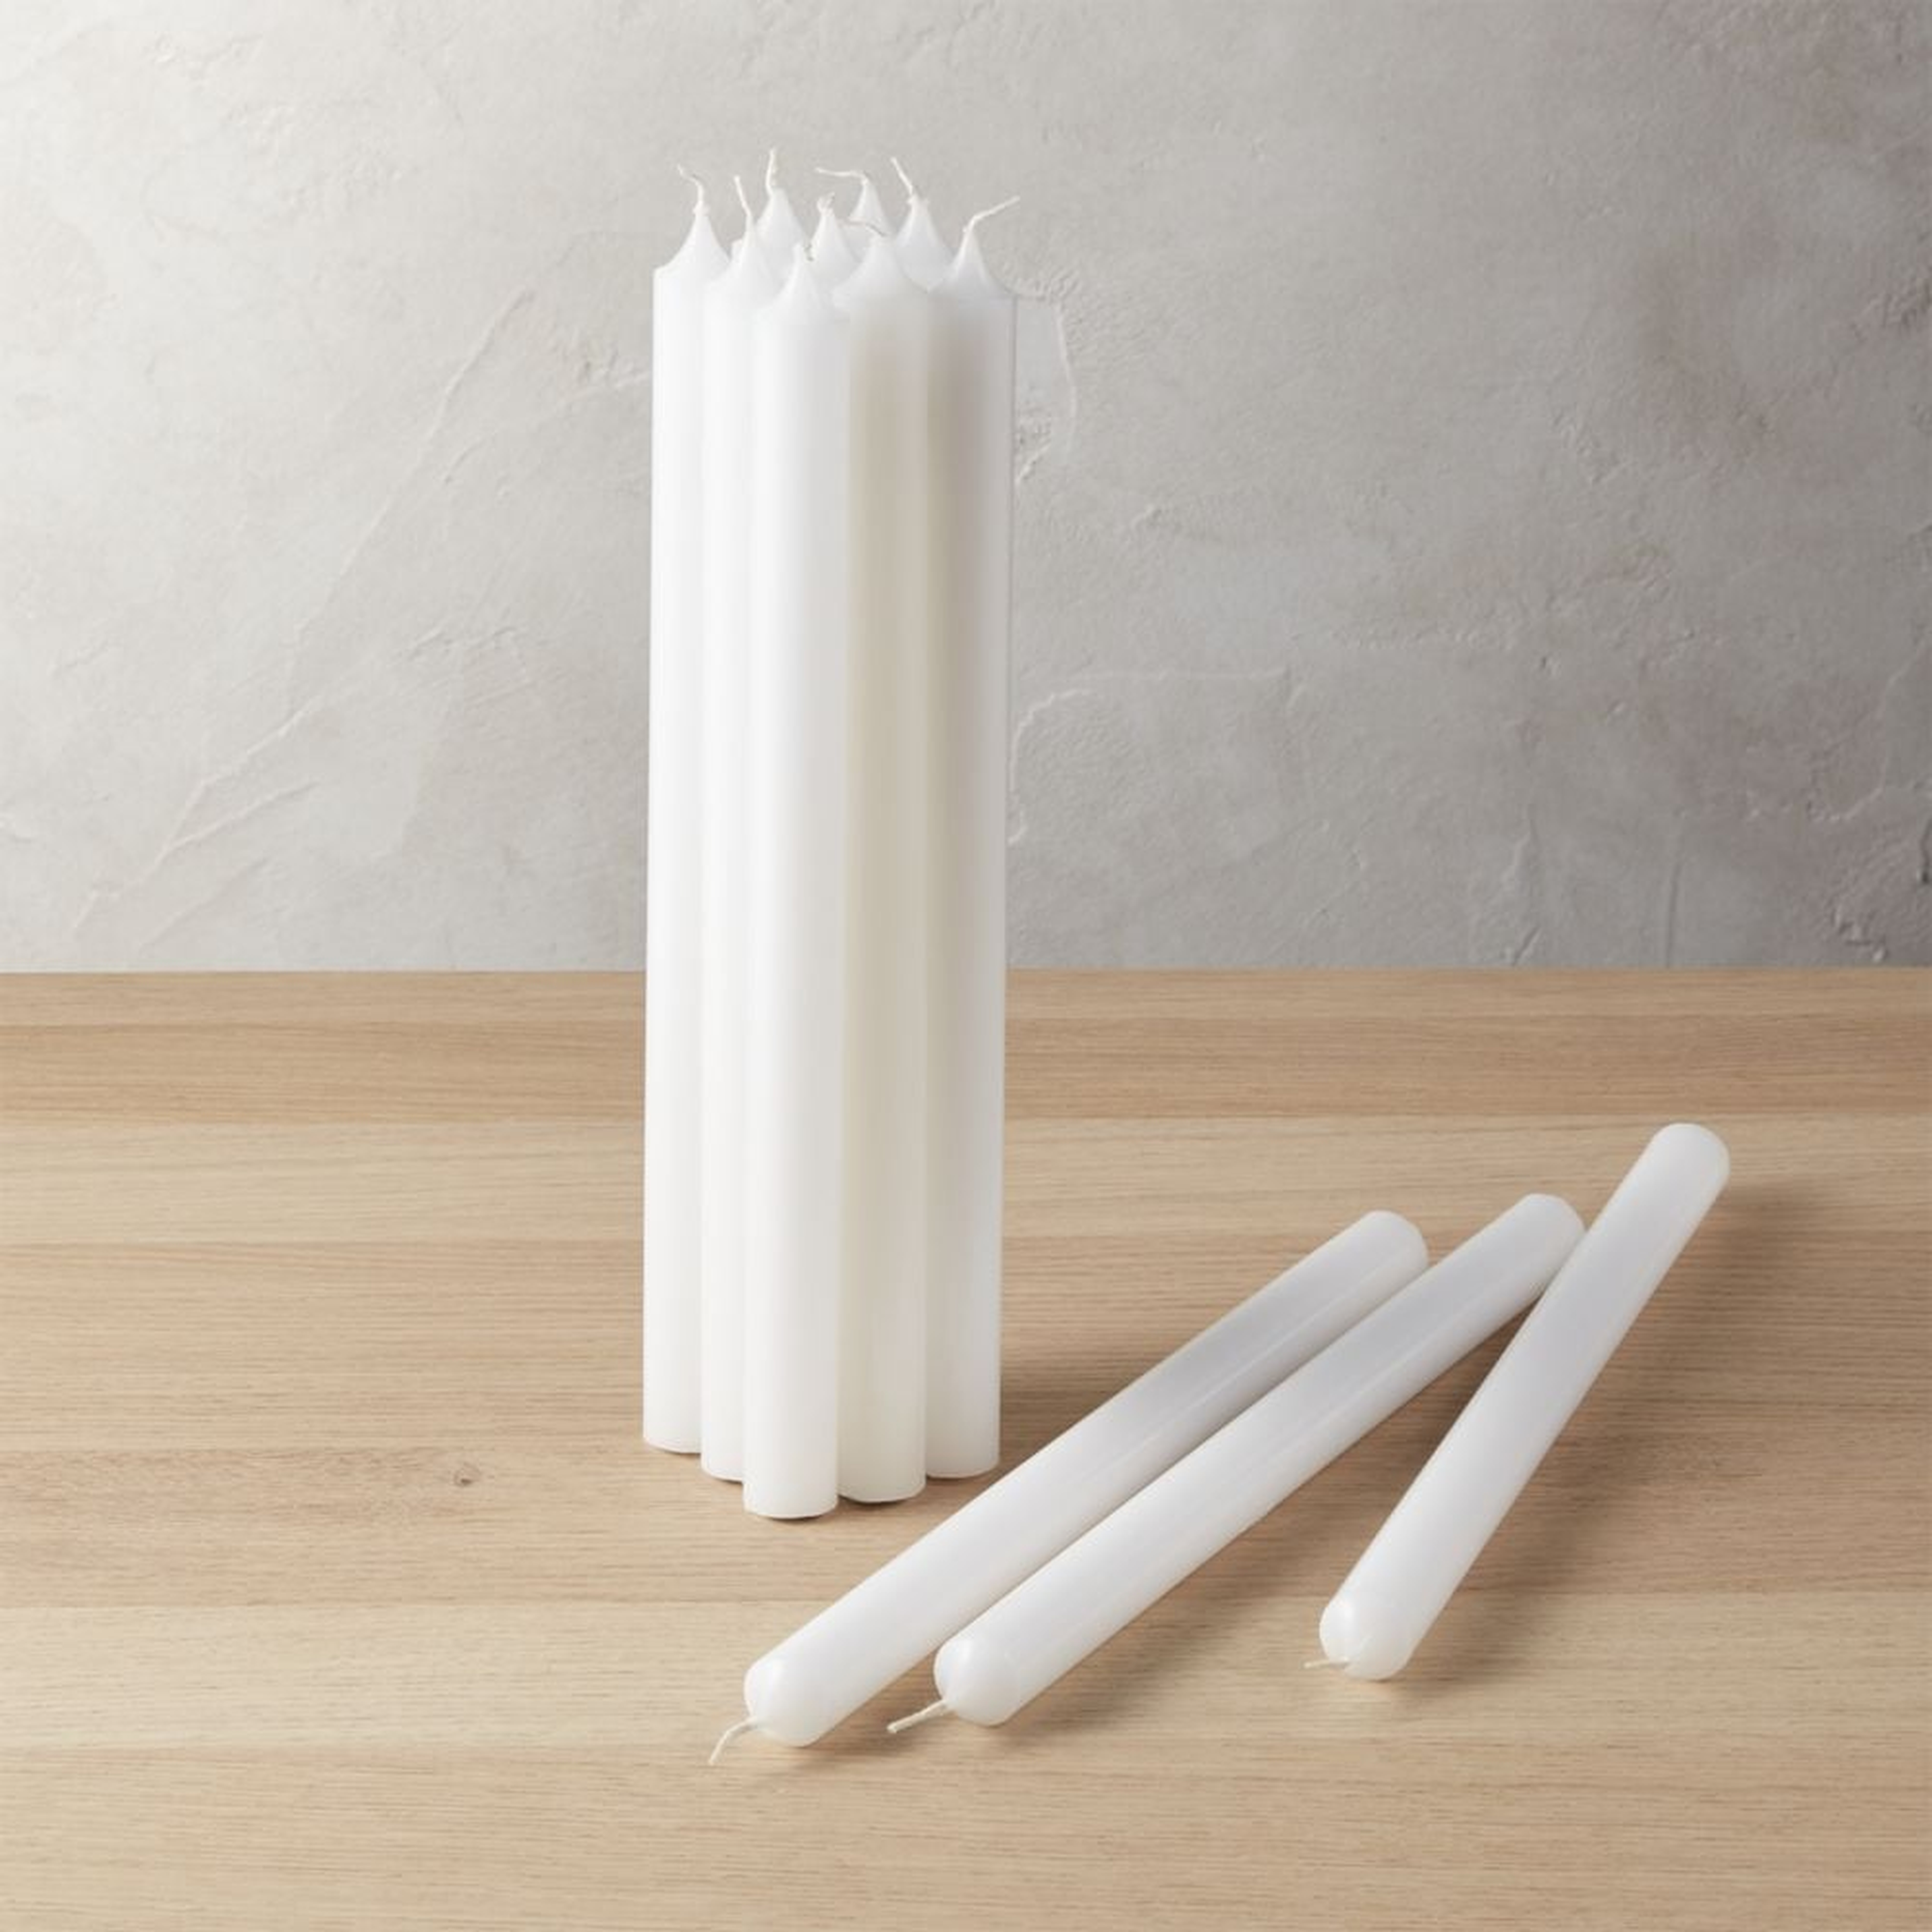 Set of 12 White Taper Candles - CB2